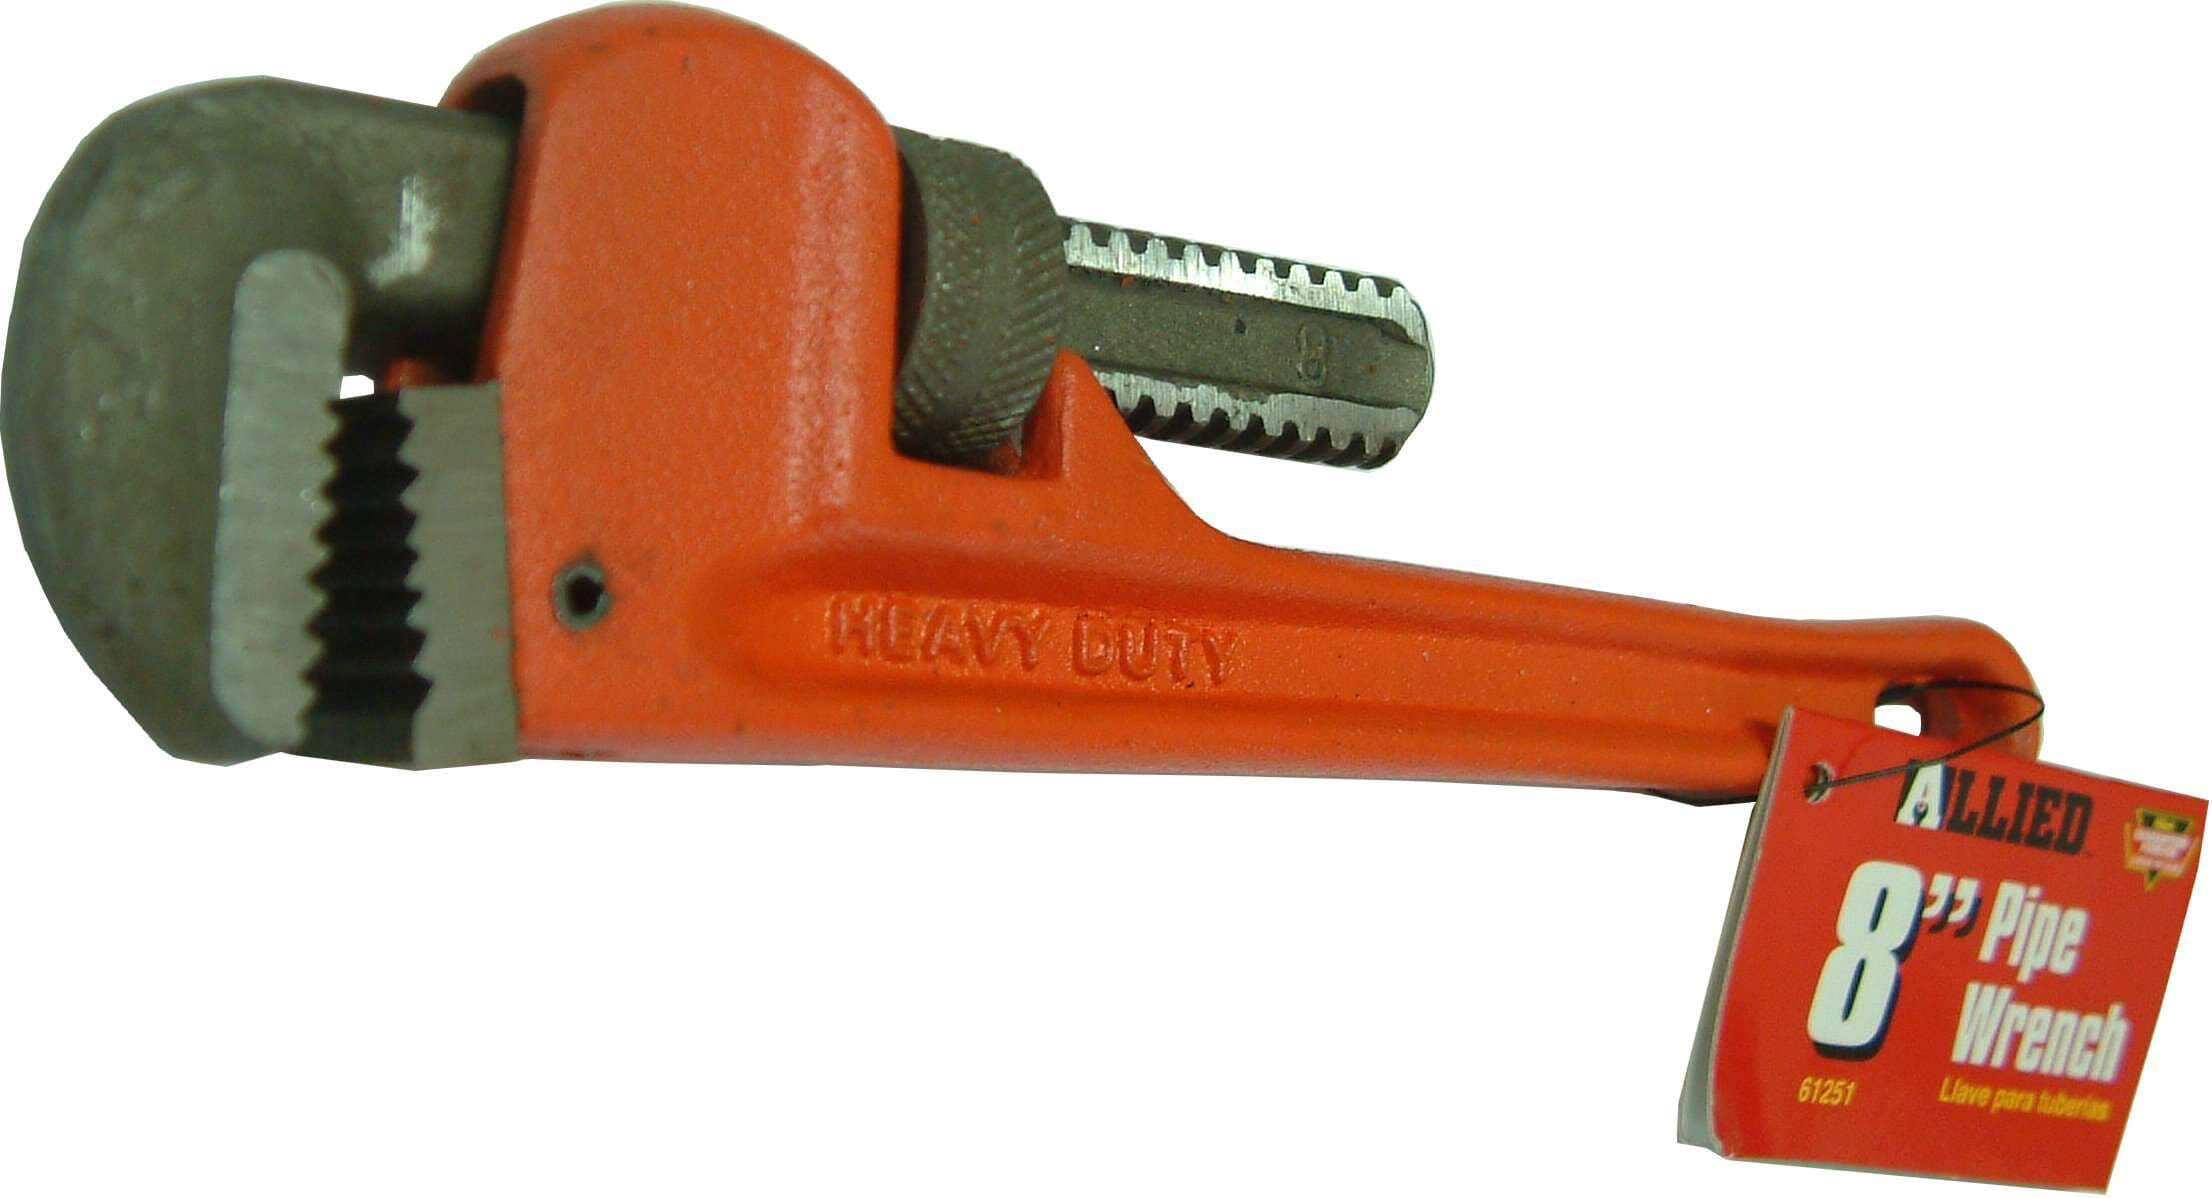 Allied Pipe Wrench - #61251 200mm